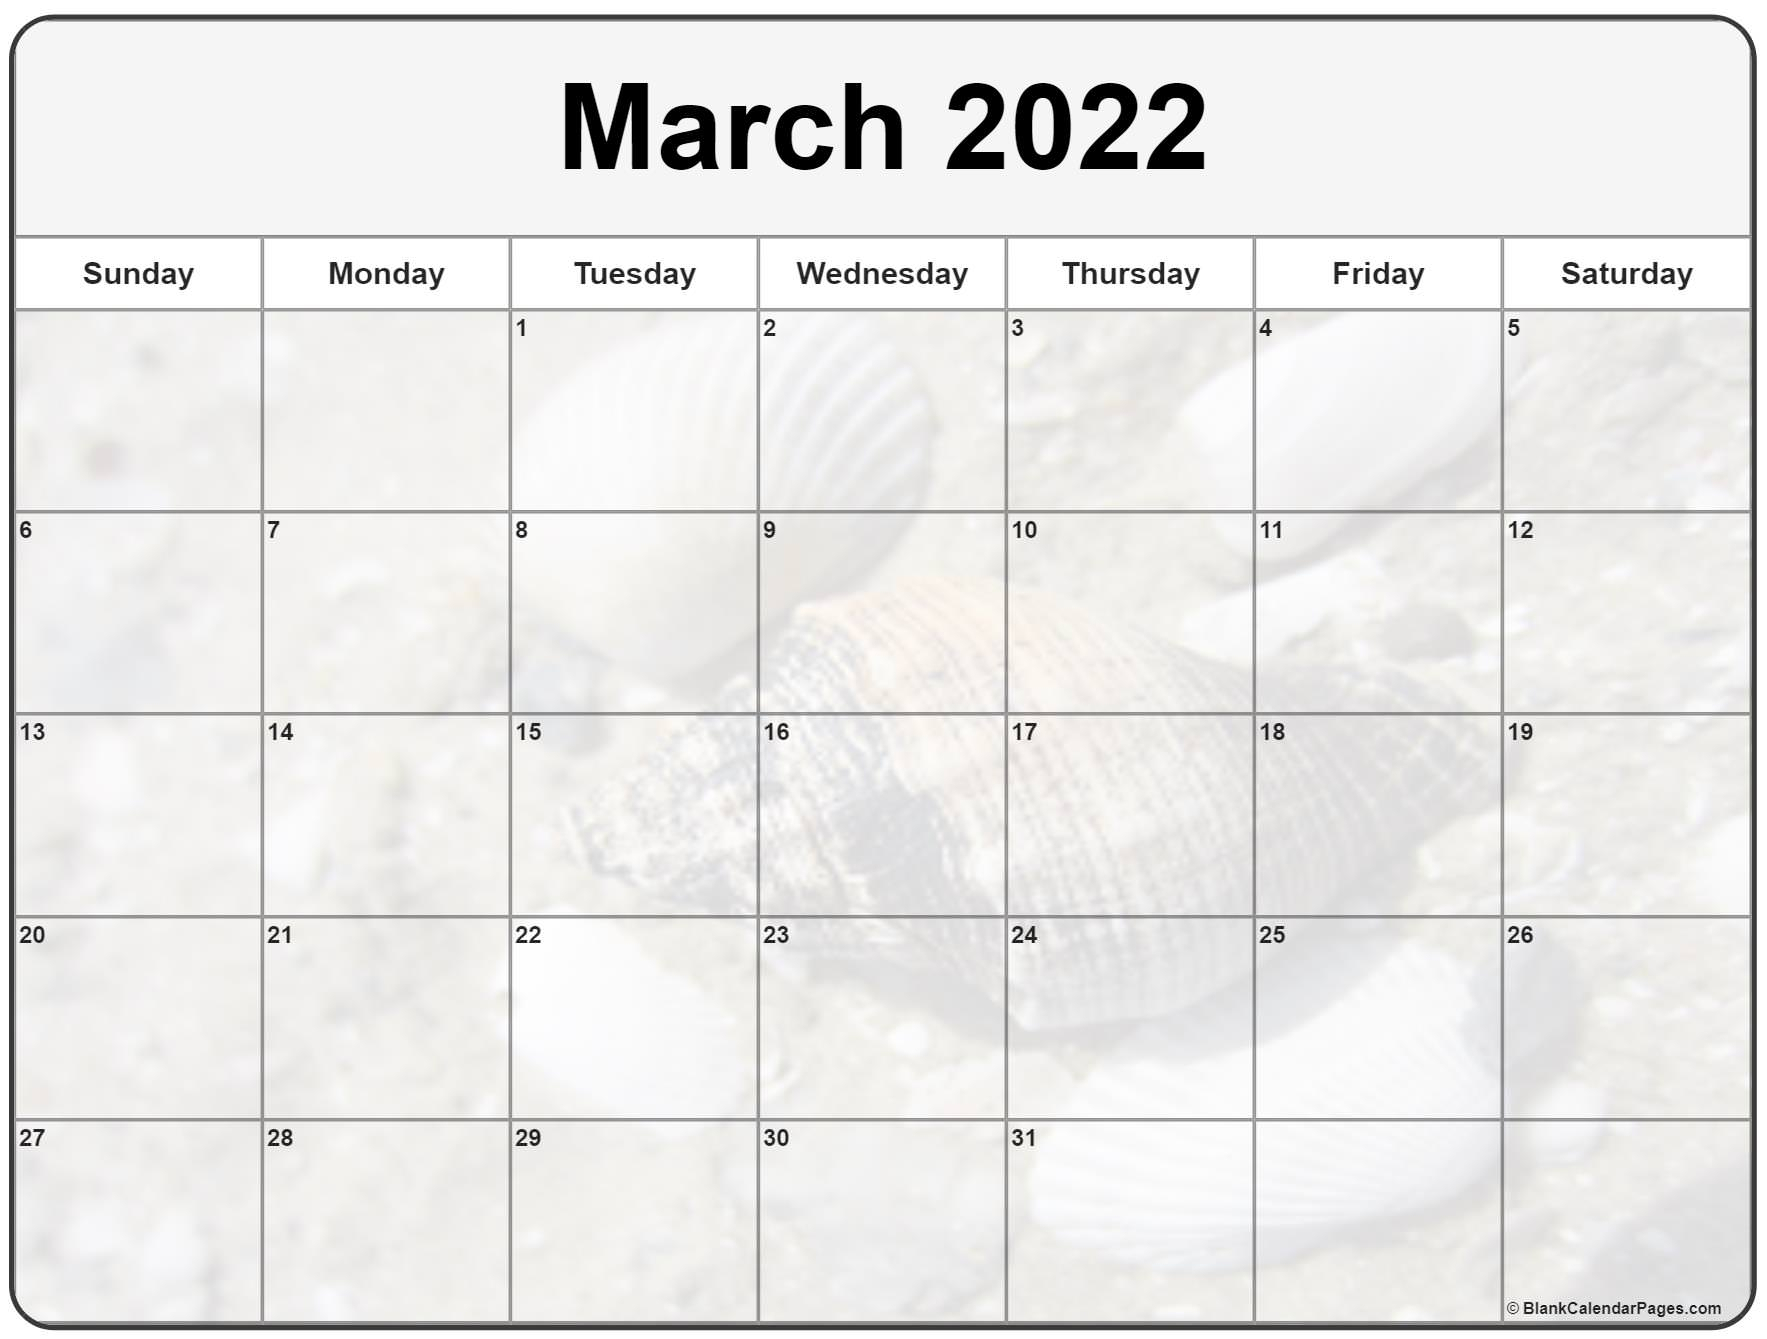 Collection Of March 2022 Photo Calendars With Image Filters